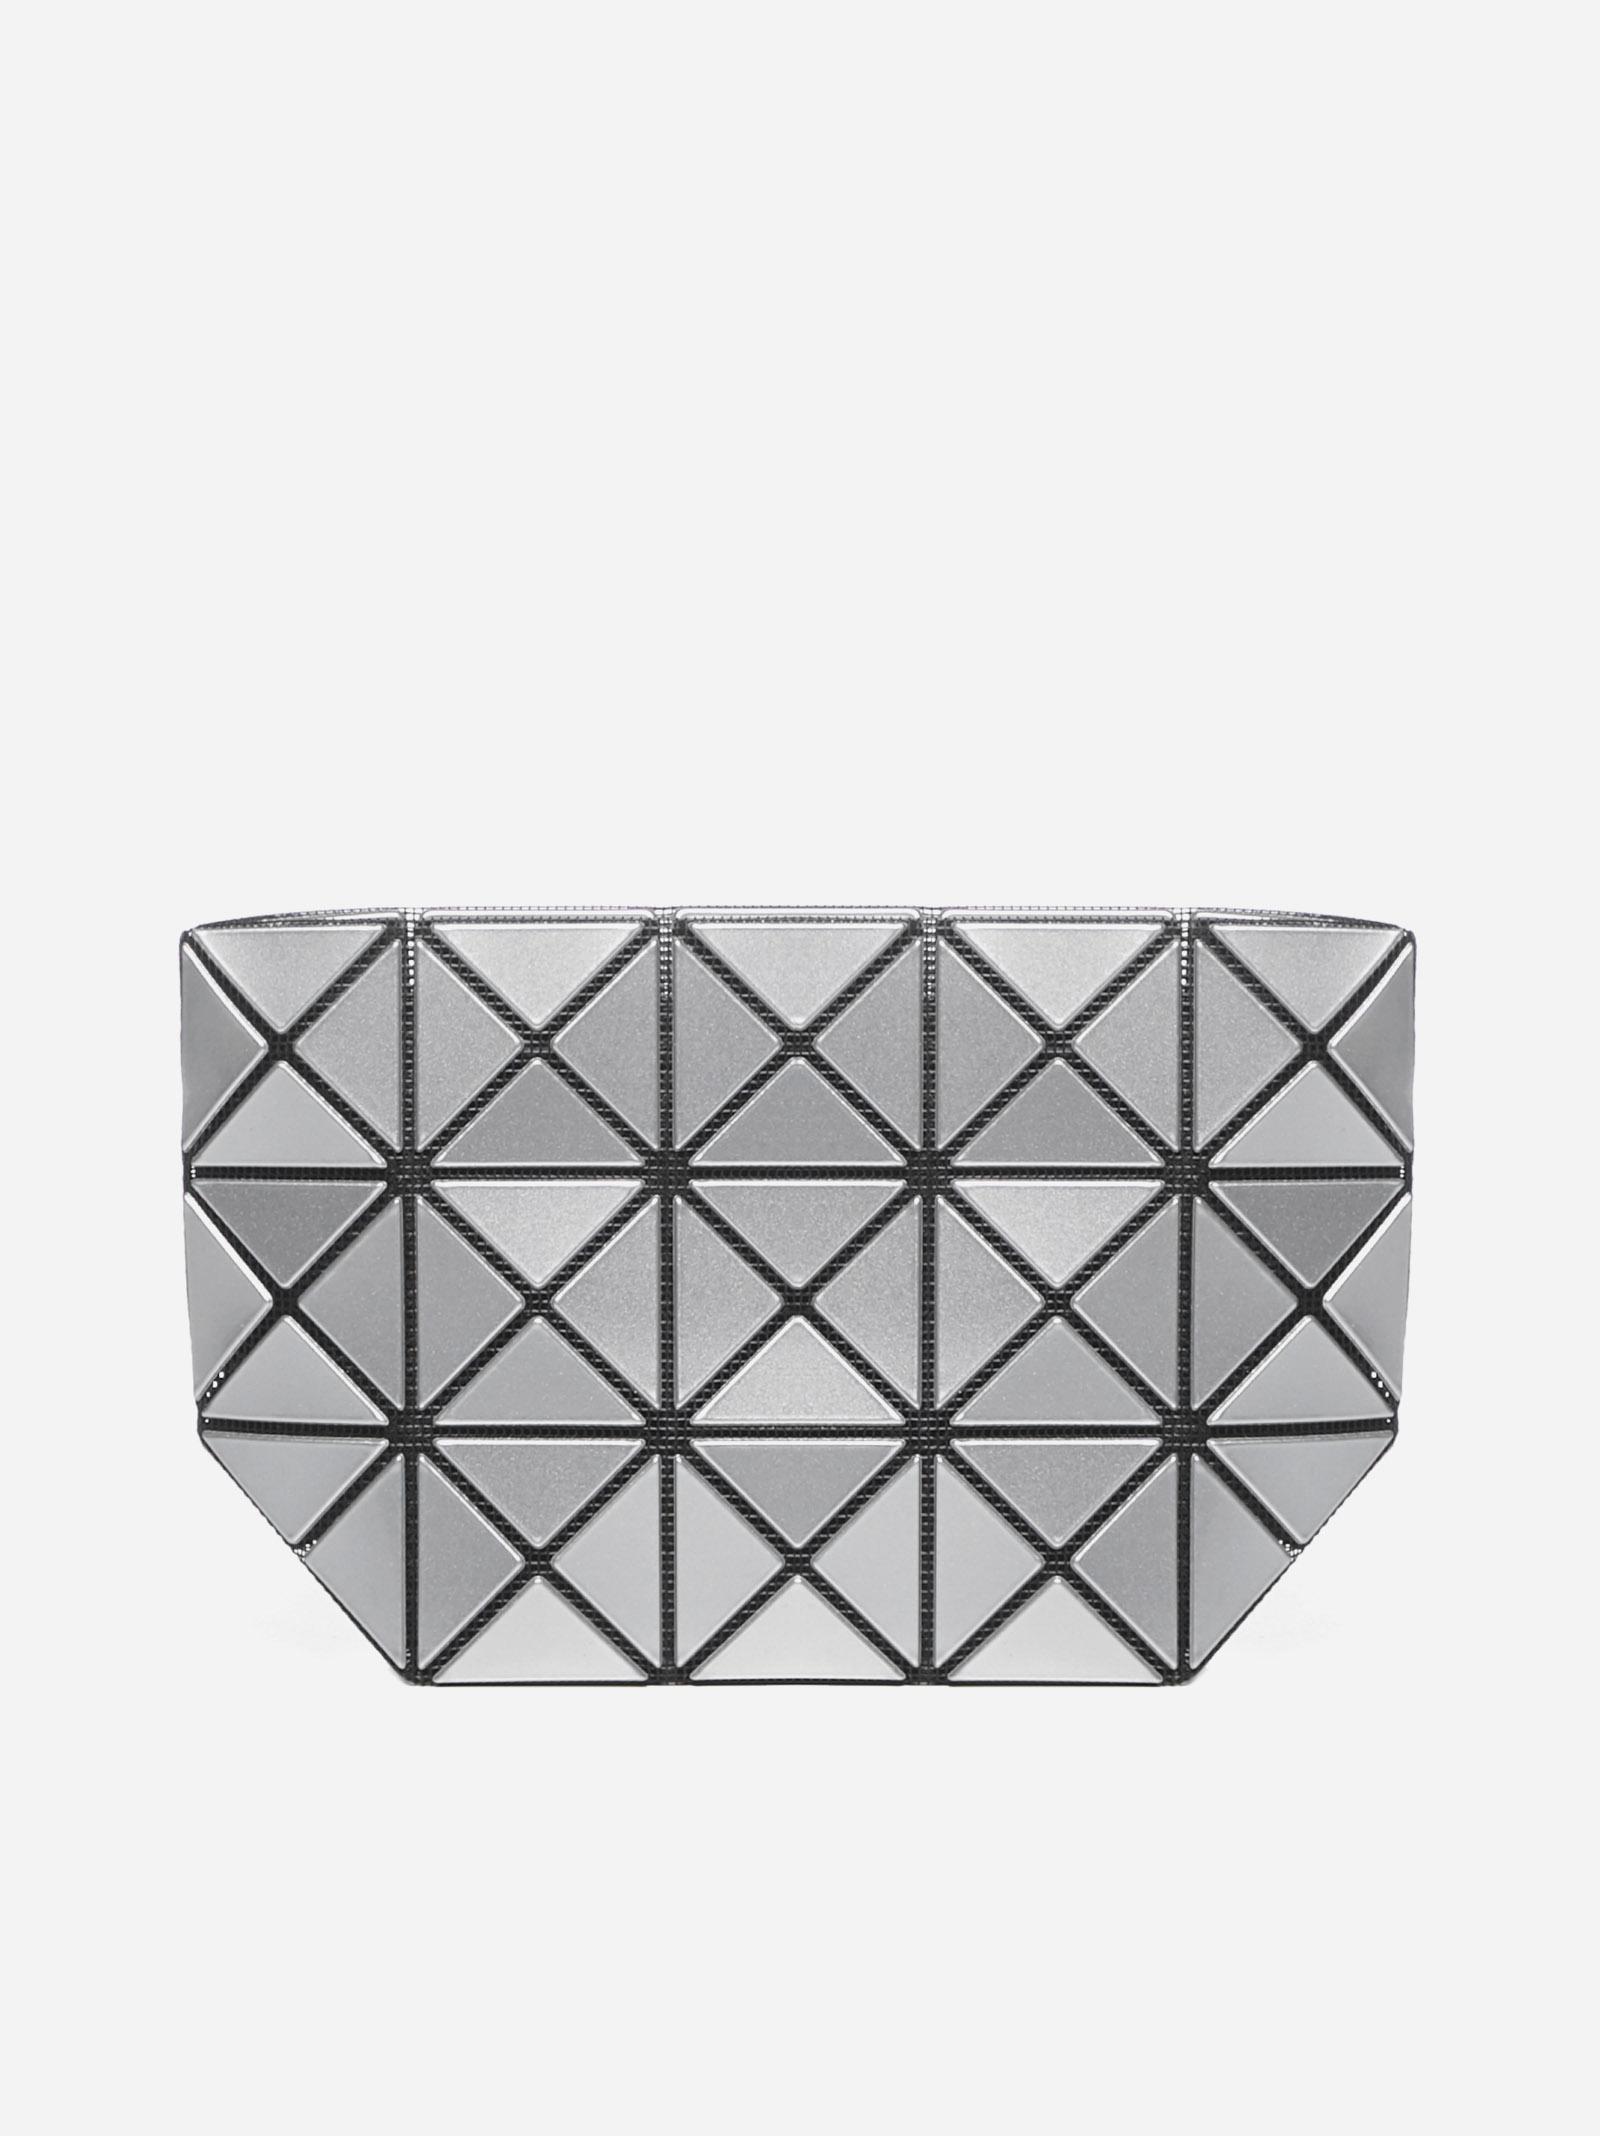 Bao Bao Issey Miyake Prism Pouch in Metallic - Lyst